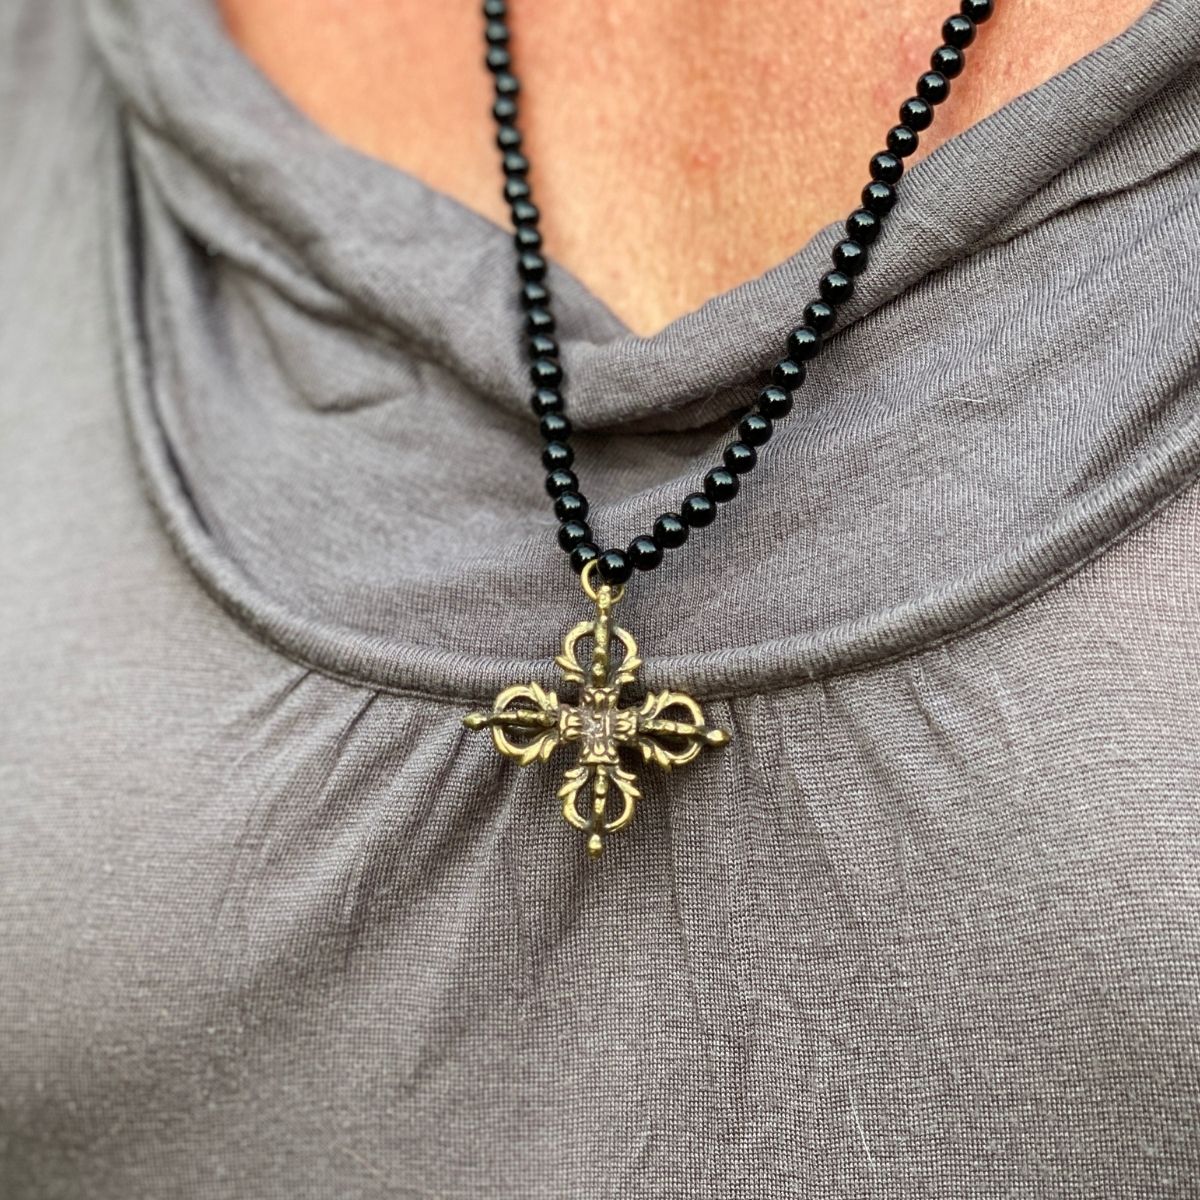 Dorje Necklace - Symbol of Enlightenment. Dorje conveys the compassion that leads one to relief of suffering, the elimination of ignorance and ultimately enlightenment. 